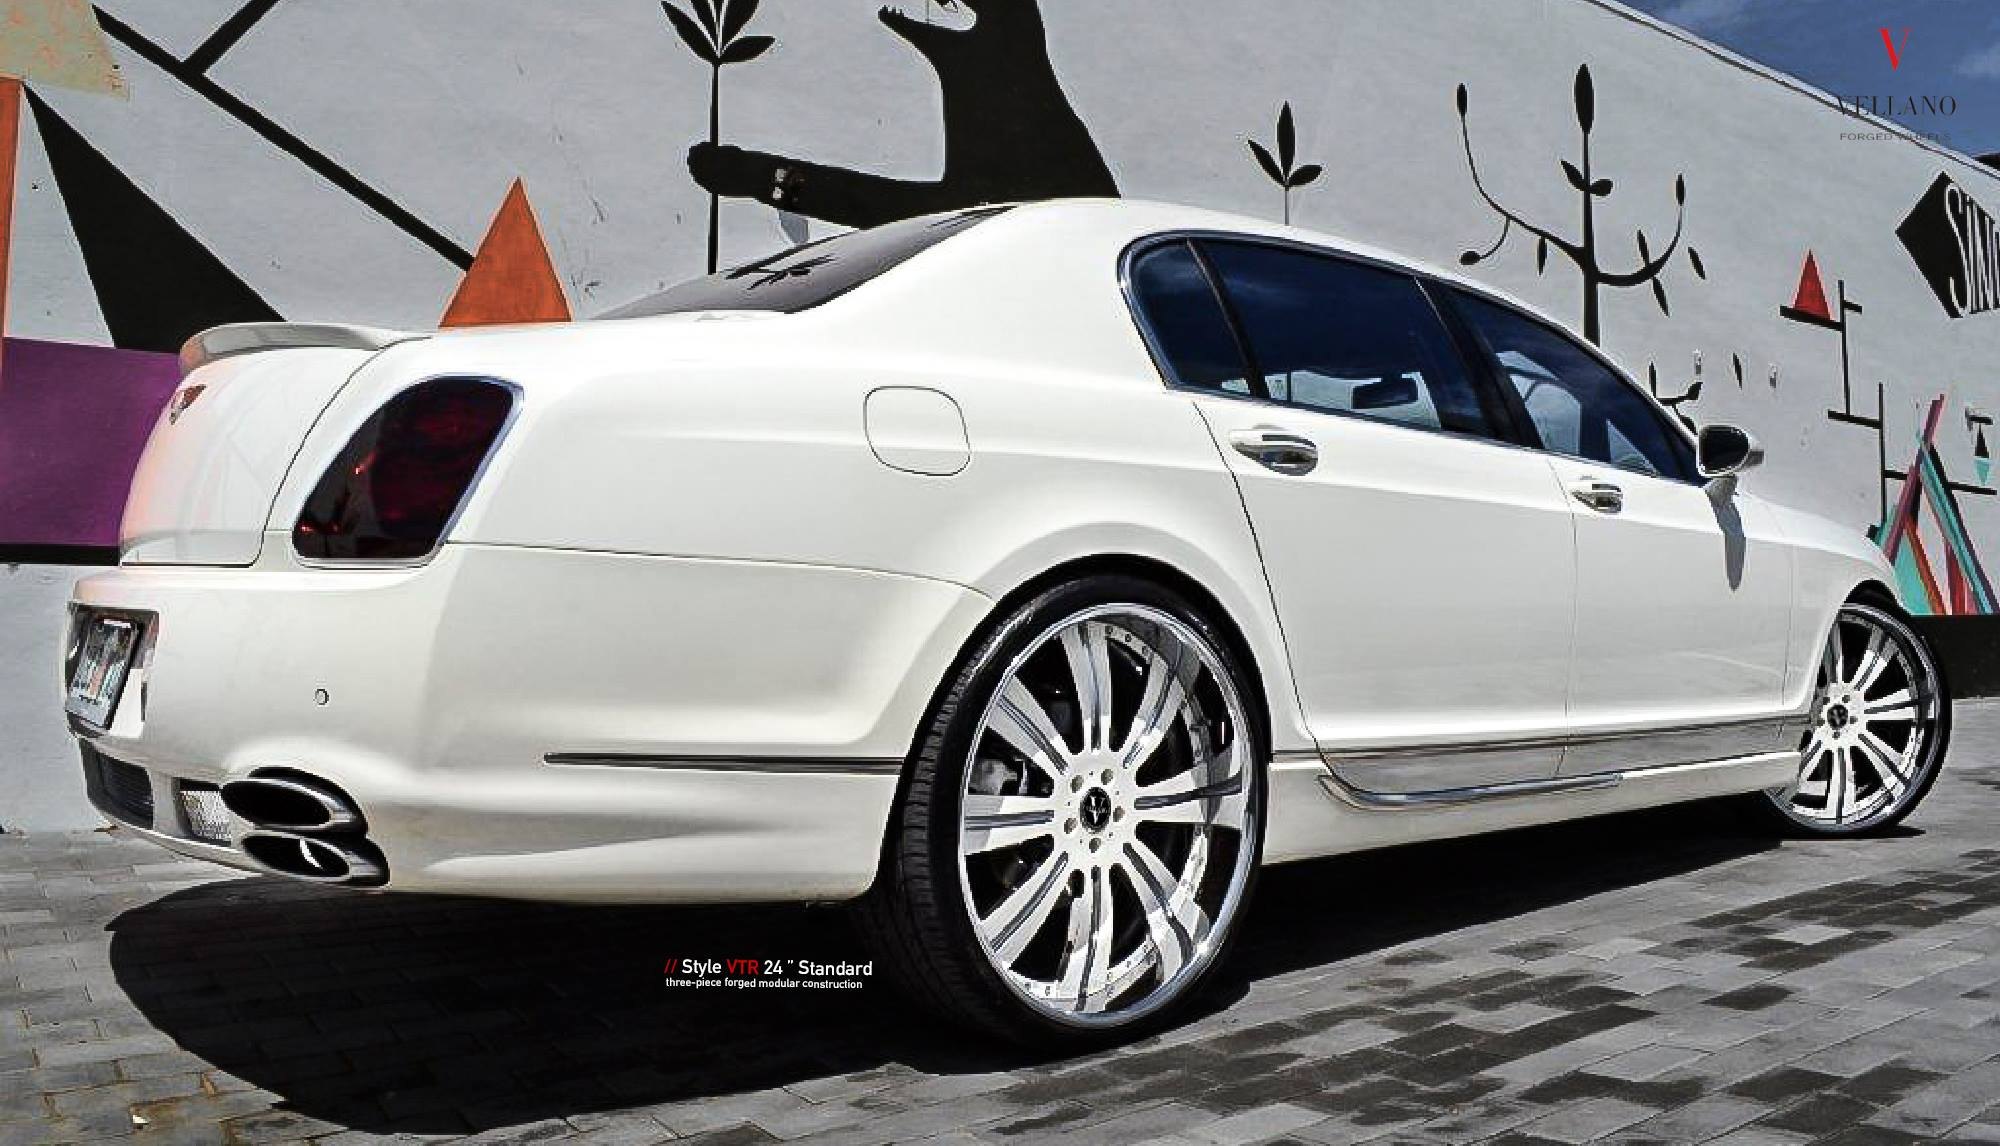 White Bently Flying Spur with Red Smoke Taillights - Photo by Vellano